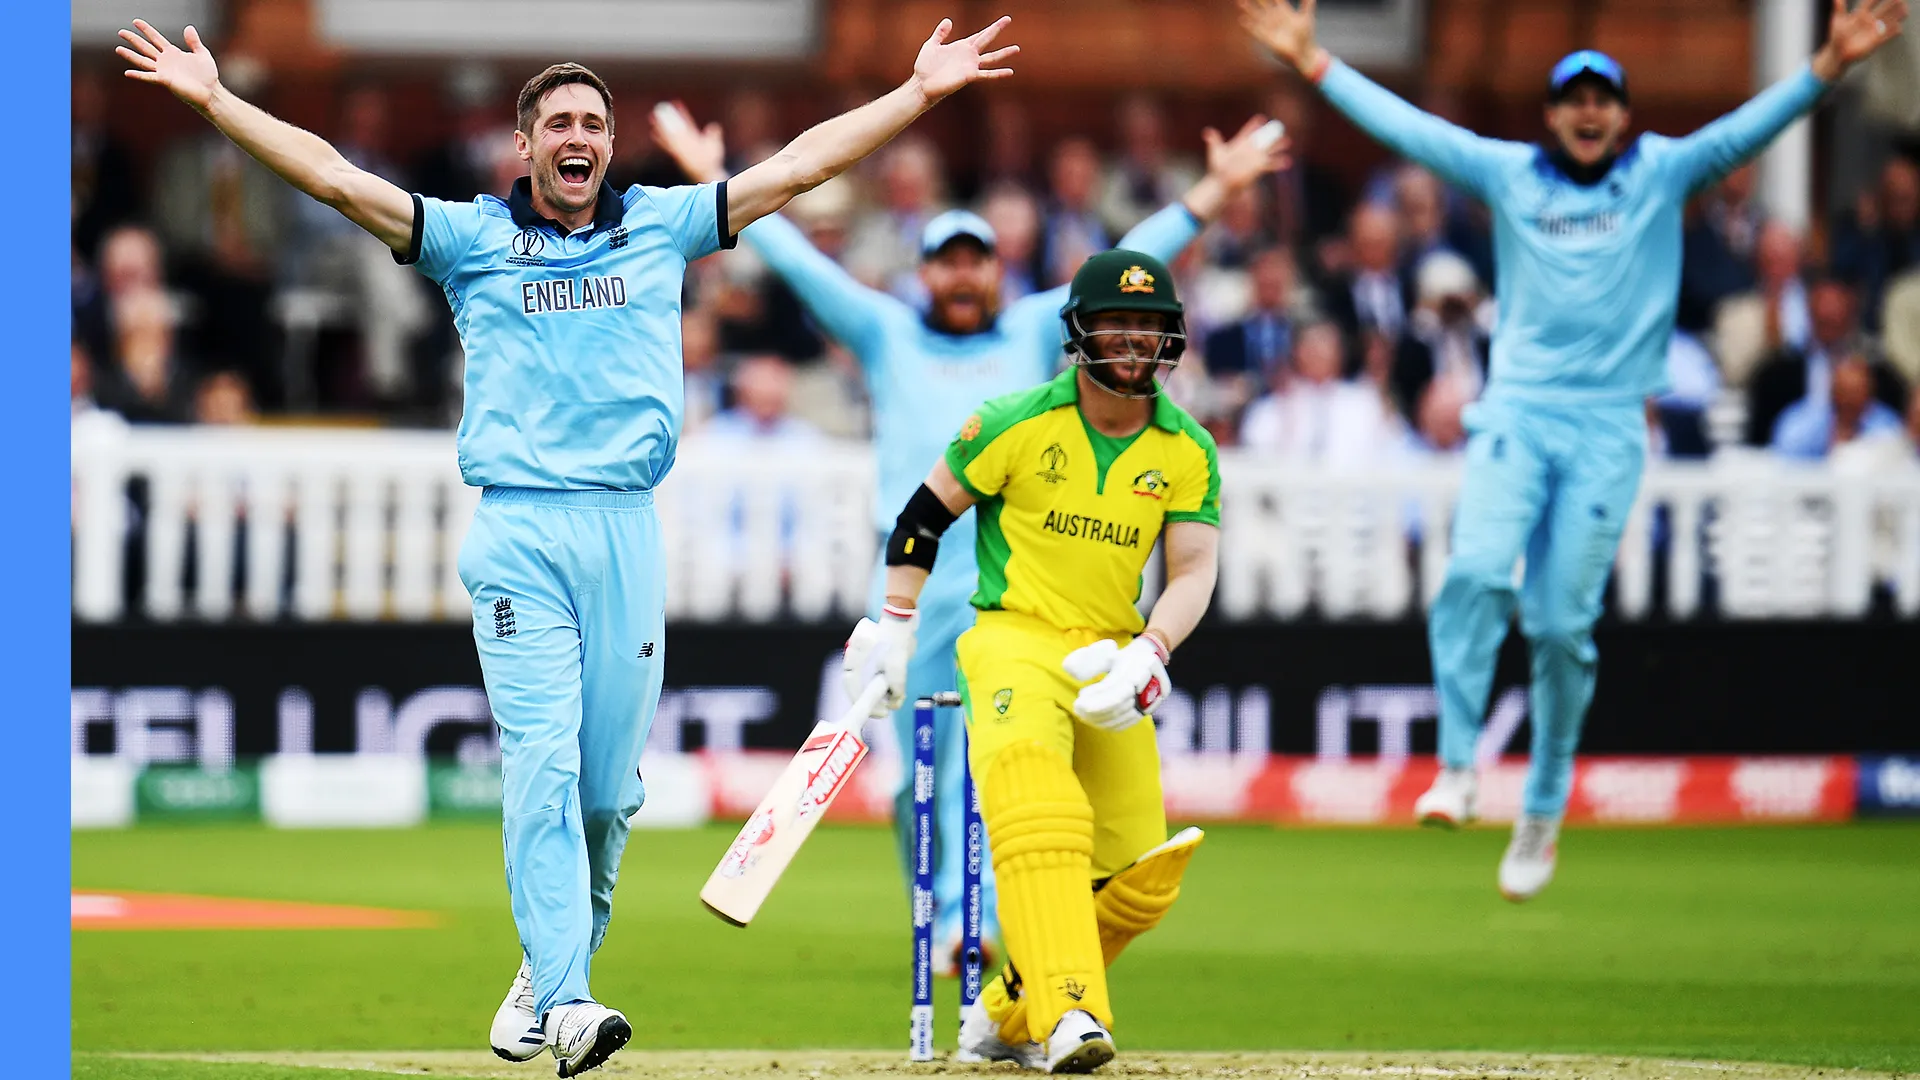 "The Epic Rivalry Renewed: England vs. Australia - A Battle for the Ages"